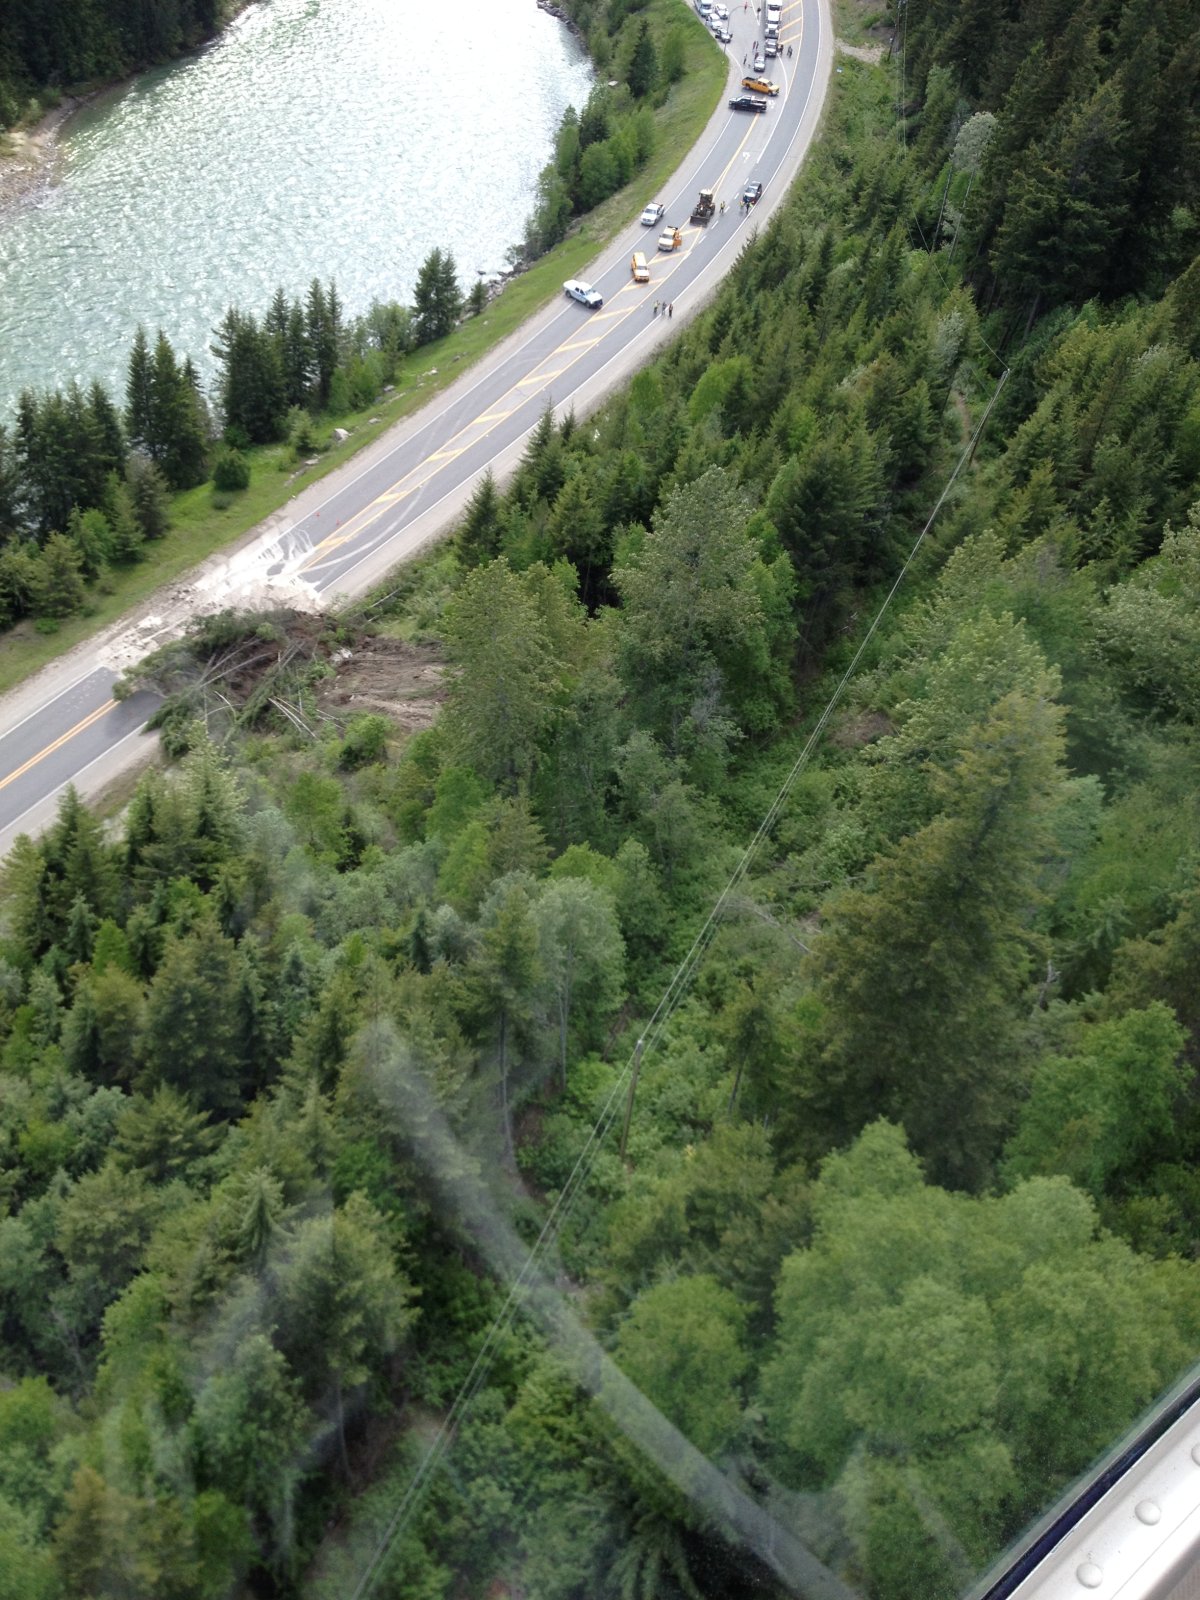 The first mudslide that occurred on Highway 16.